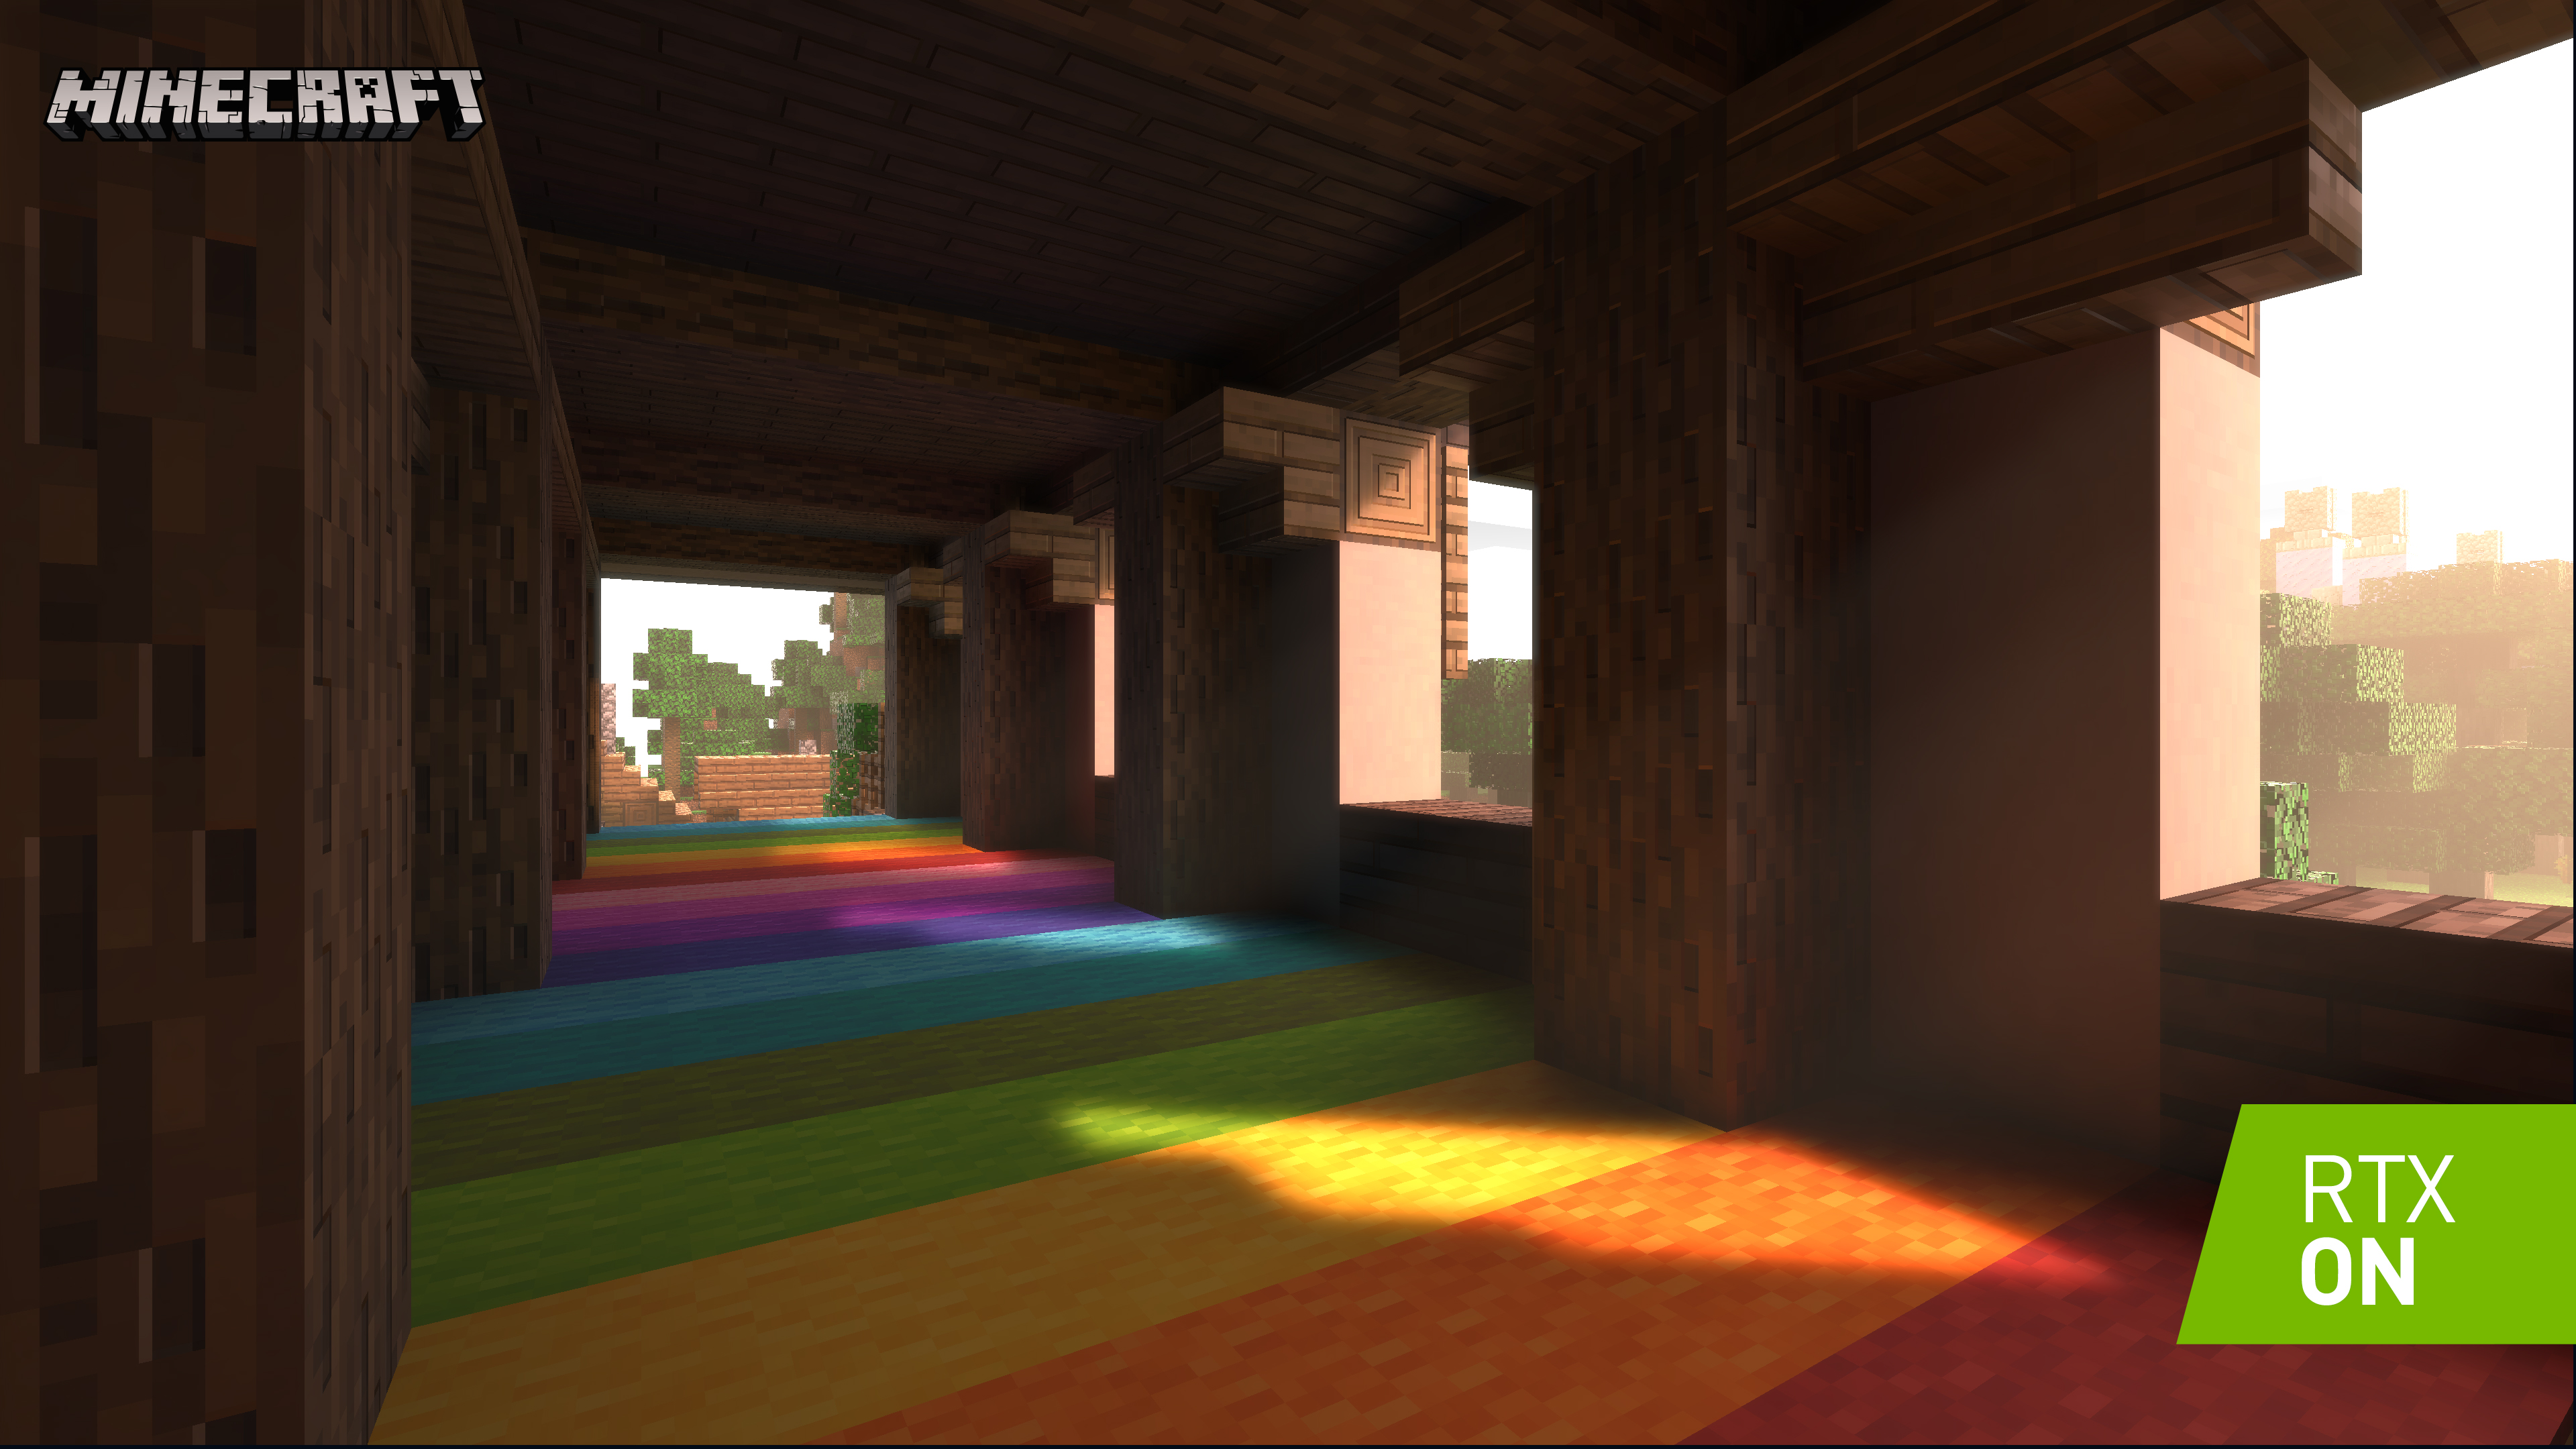 is RTX On! Real-Time Ray Tracing to